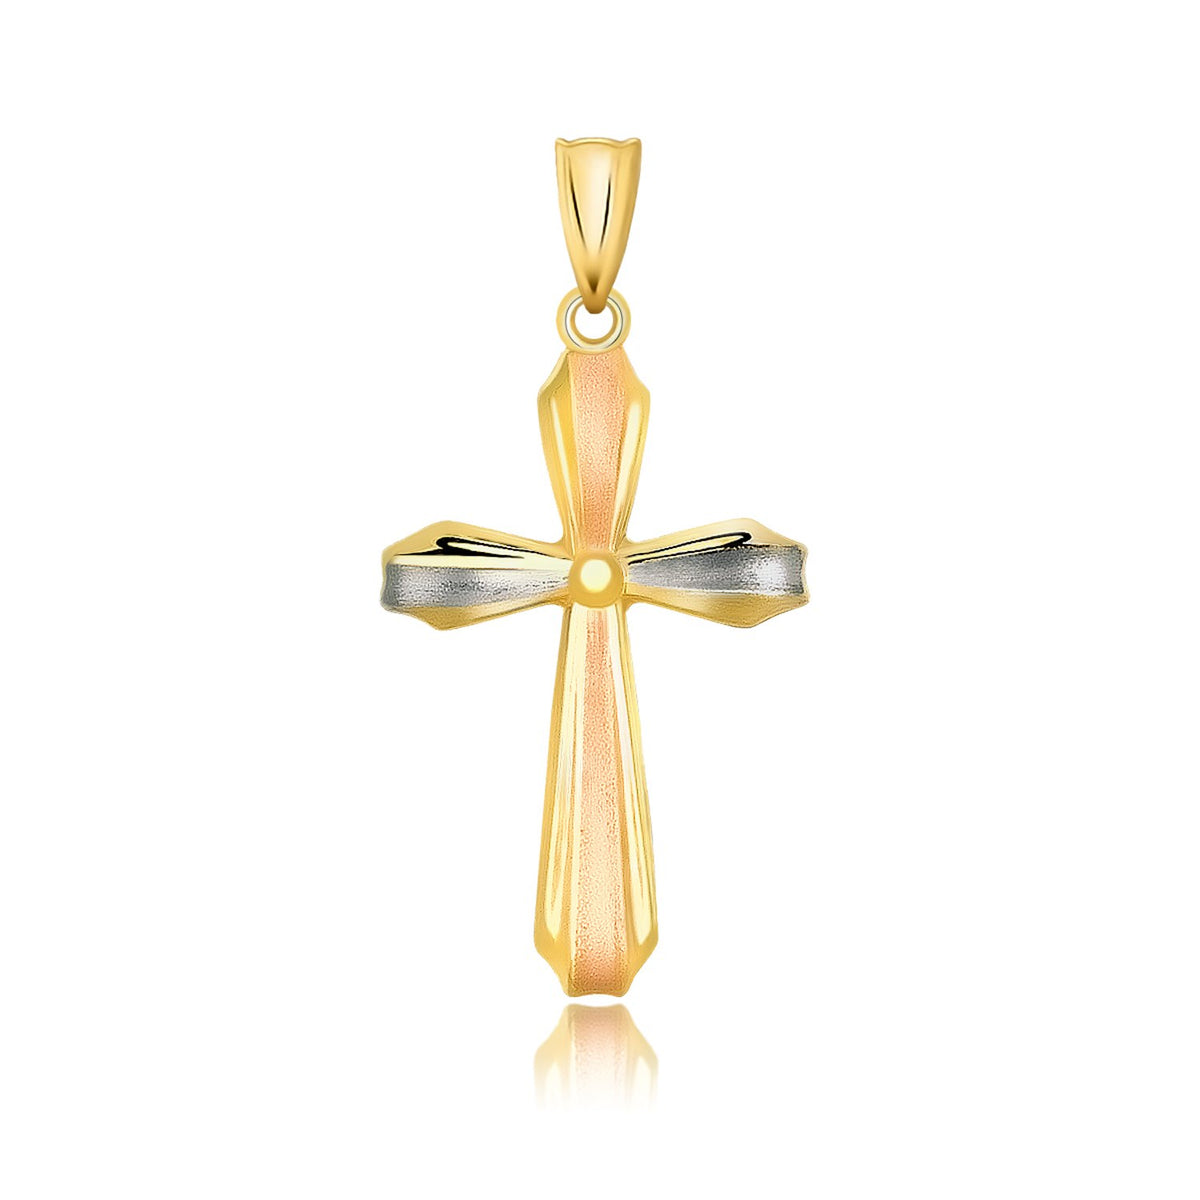 Cross Motif Pendant with Textured Finish - 14k Tri-Color Gold